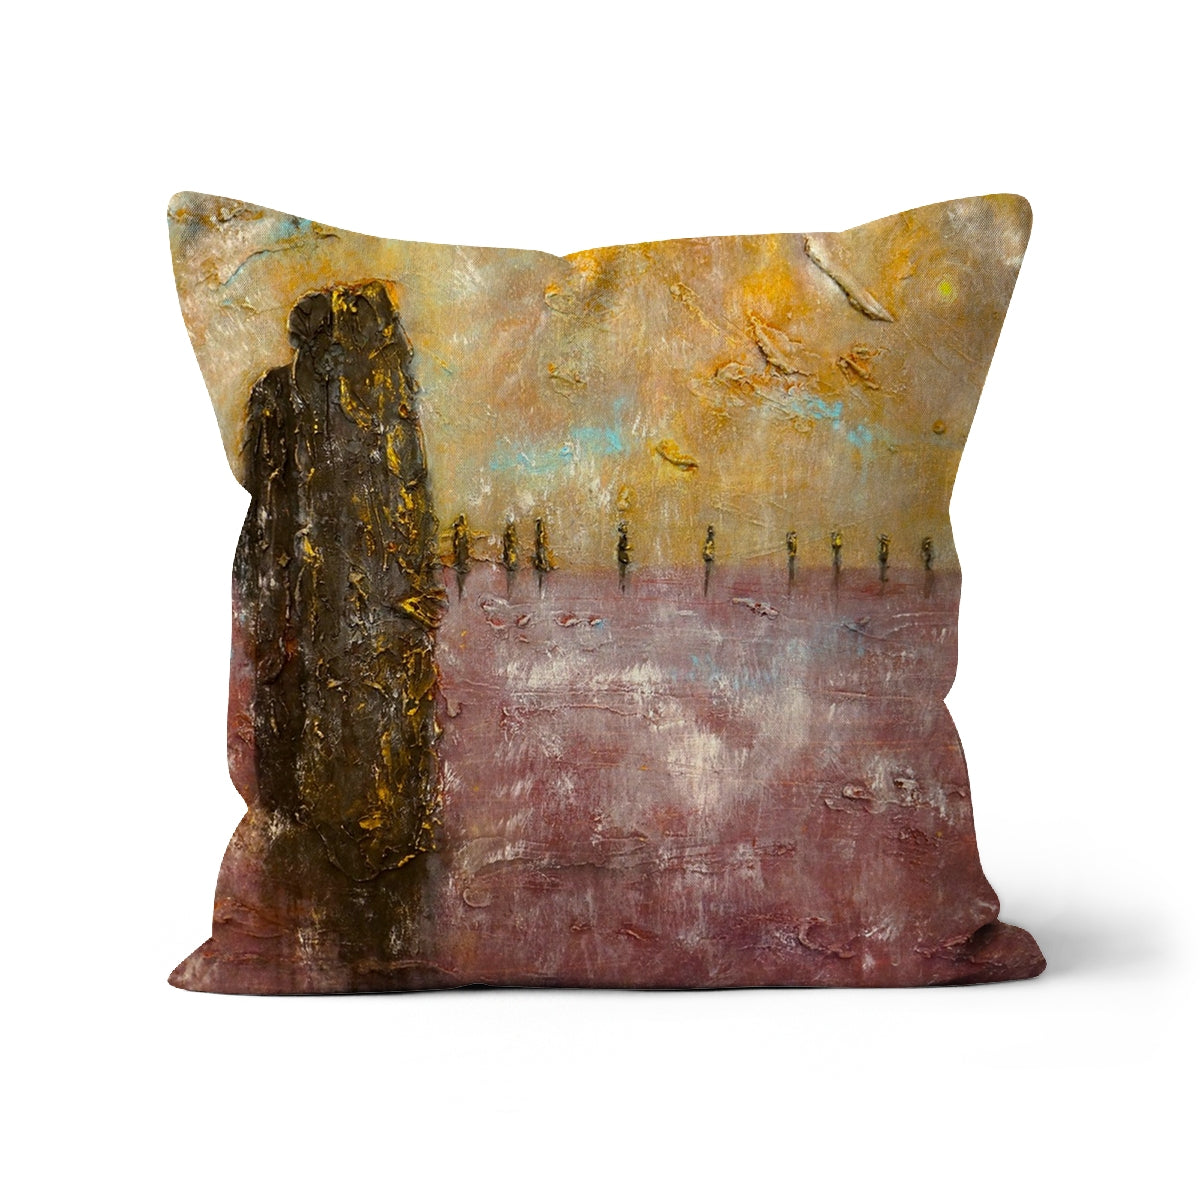 Bordgar Mist Orkney Art Gifts Cushion-Cushions-Orkney Art Gallery-Faux Suede-24"x24"-Paintings, Prints, Homeware, Art Gifts From Scotland By Scottish Artist Kevin Hunter